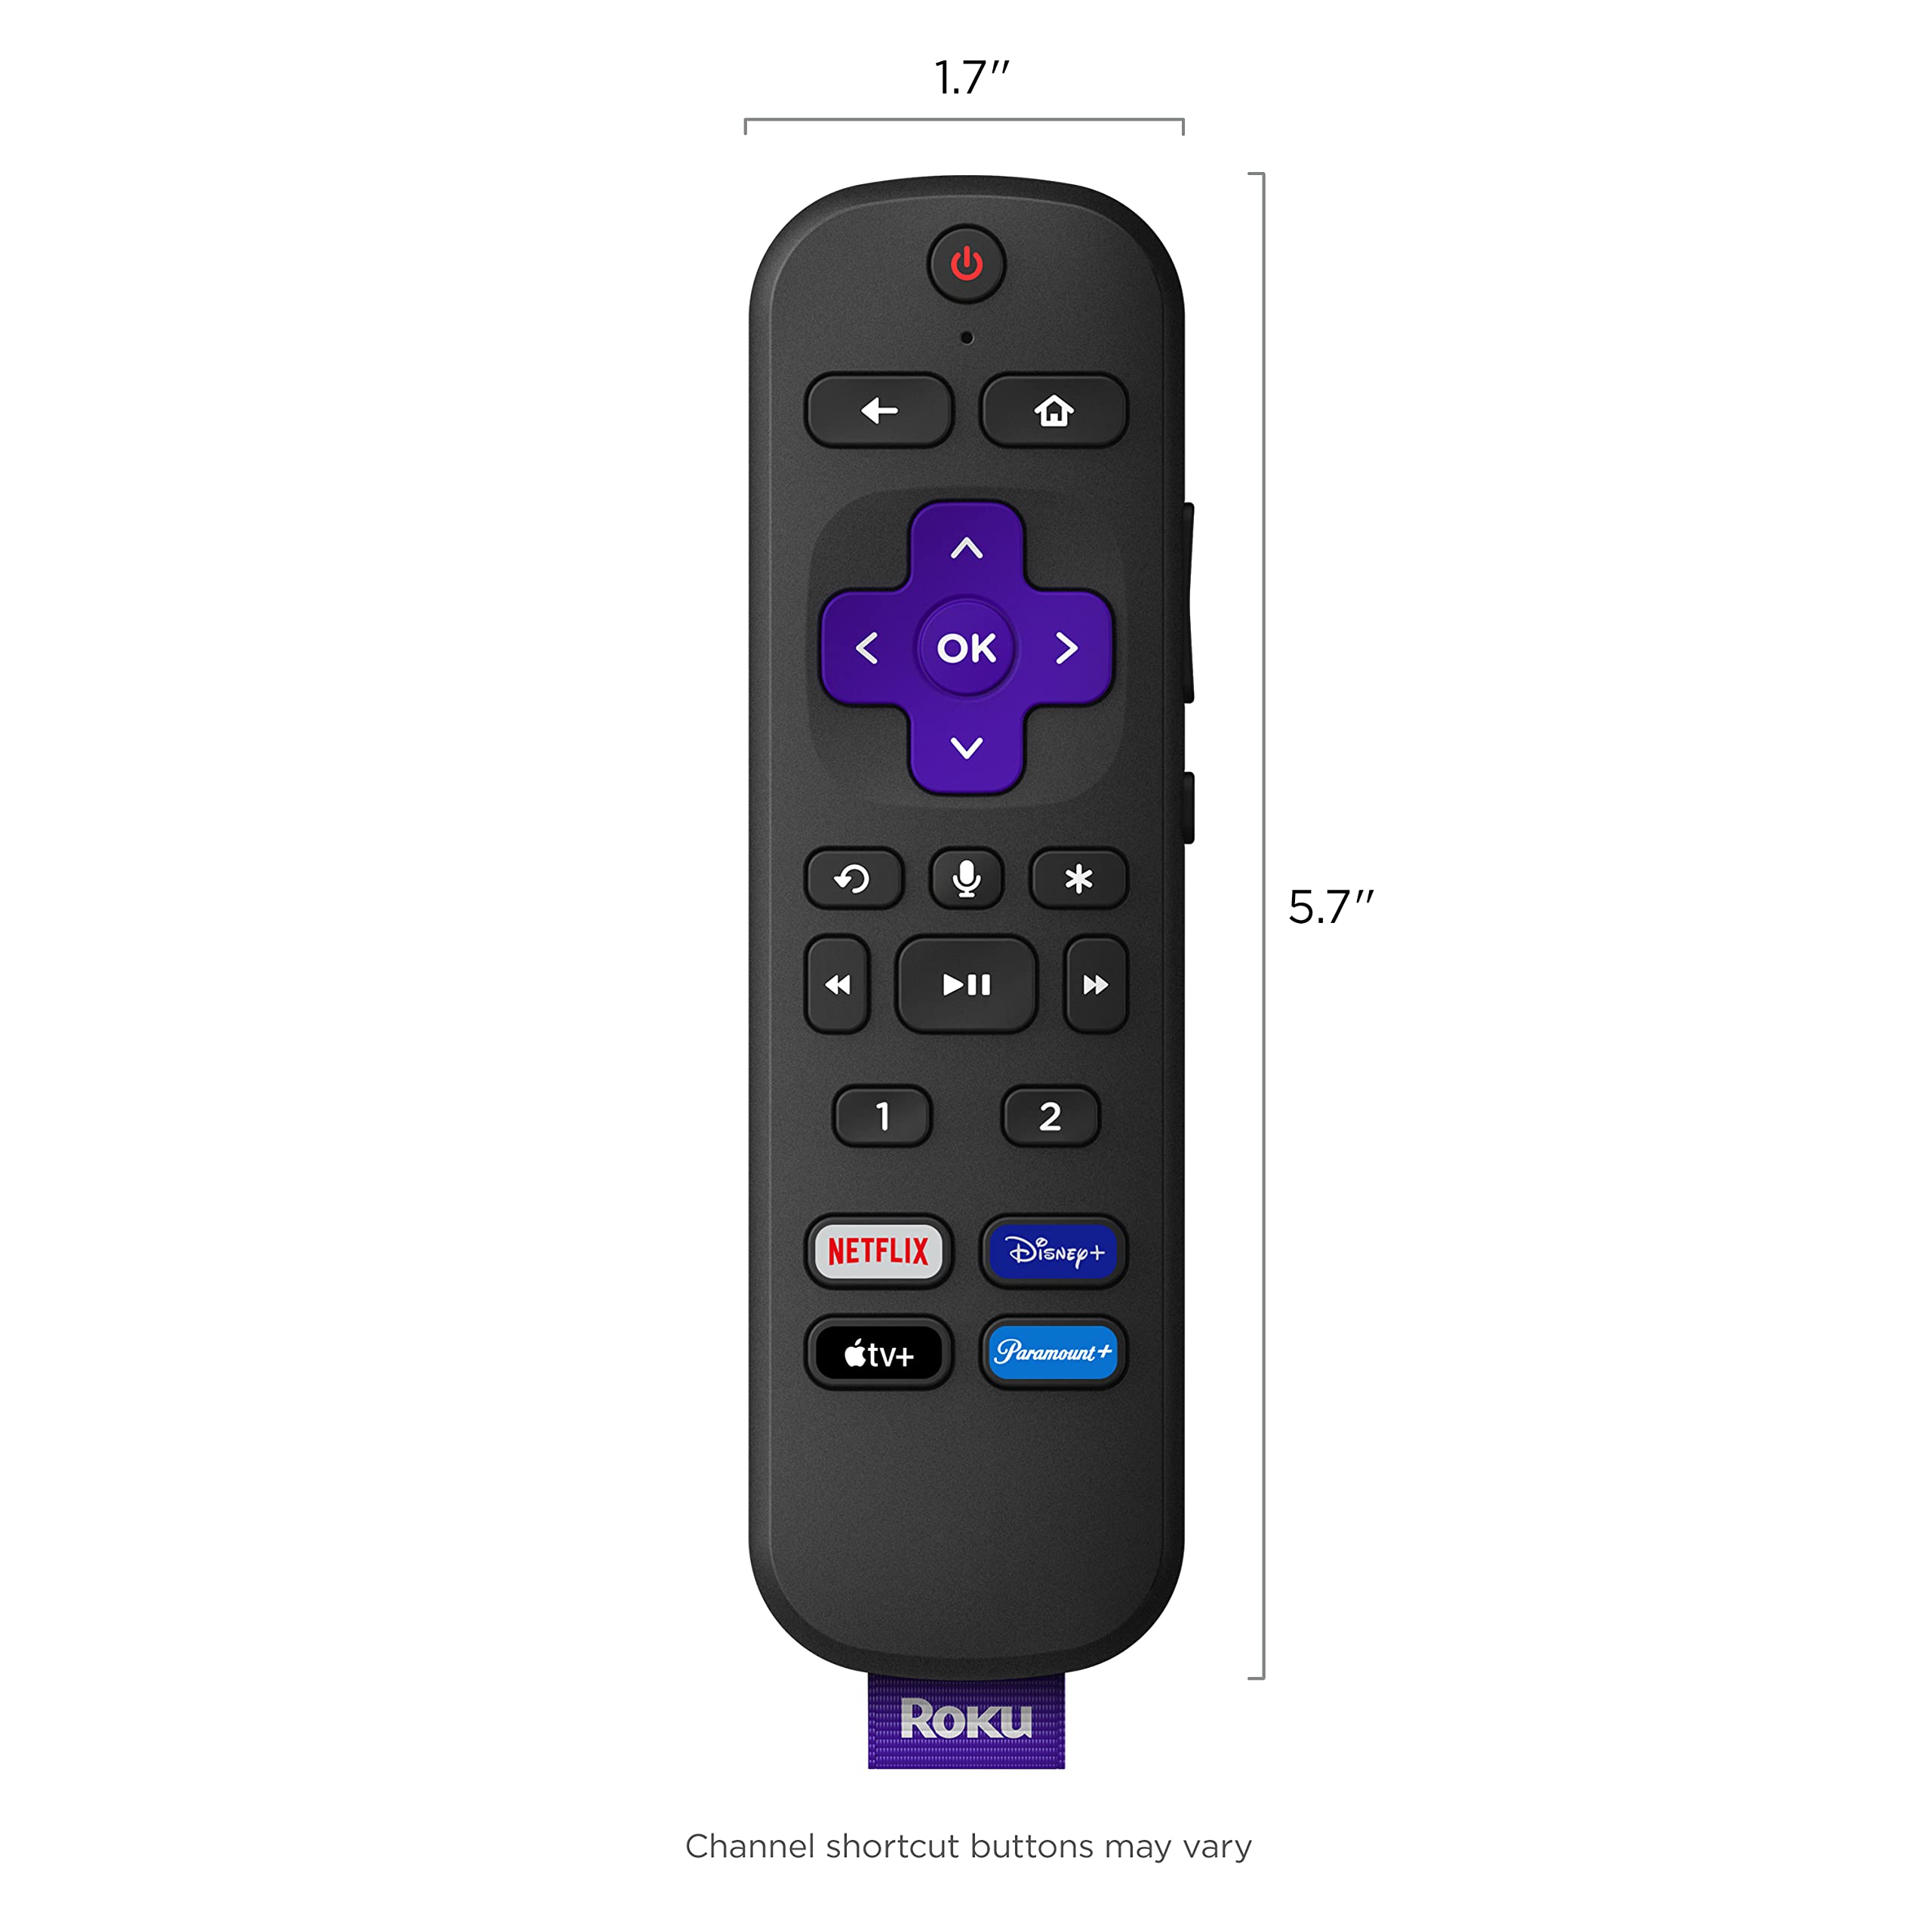 Roku Voice Remote Pro with TV controls | Rechargeable , lost remote finder, private listening , and shortcut buttons for Roku Players, TV, & Streambars